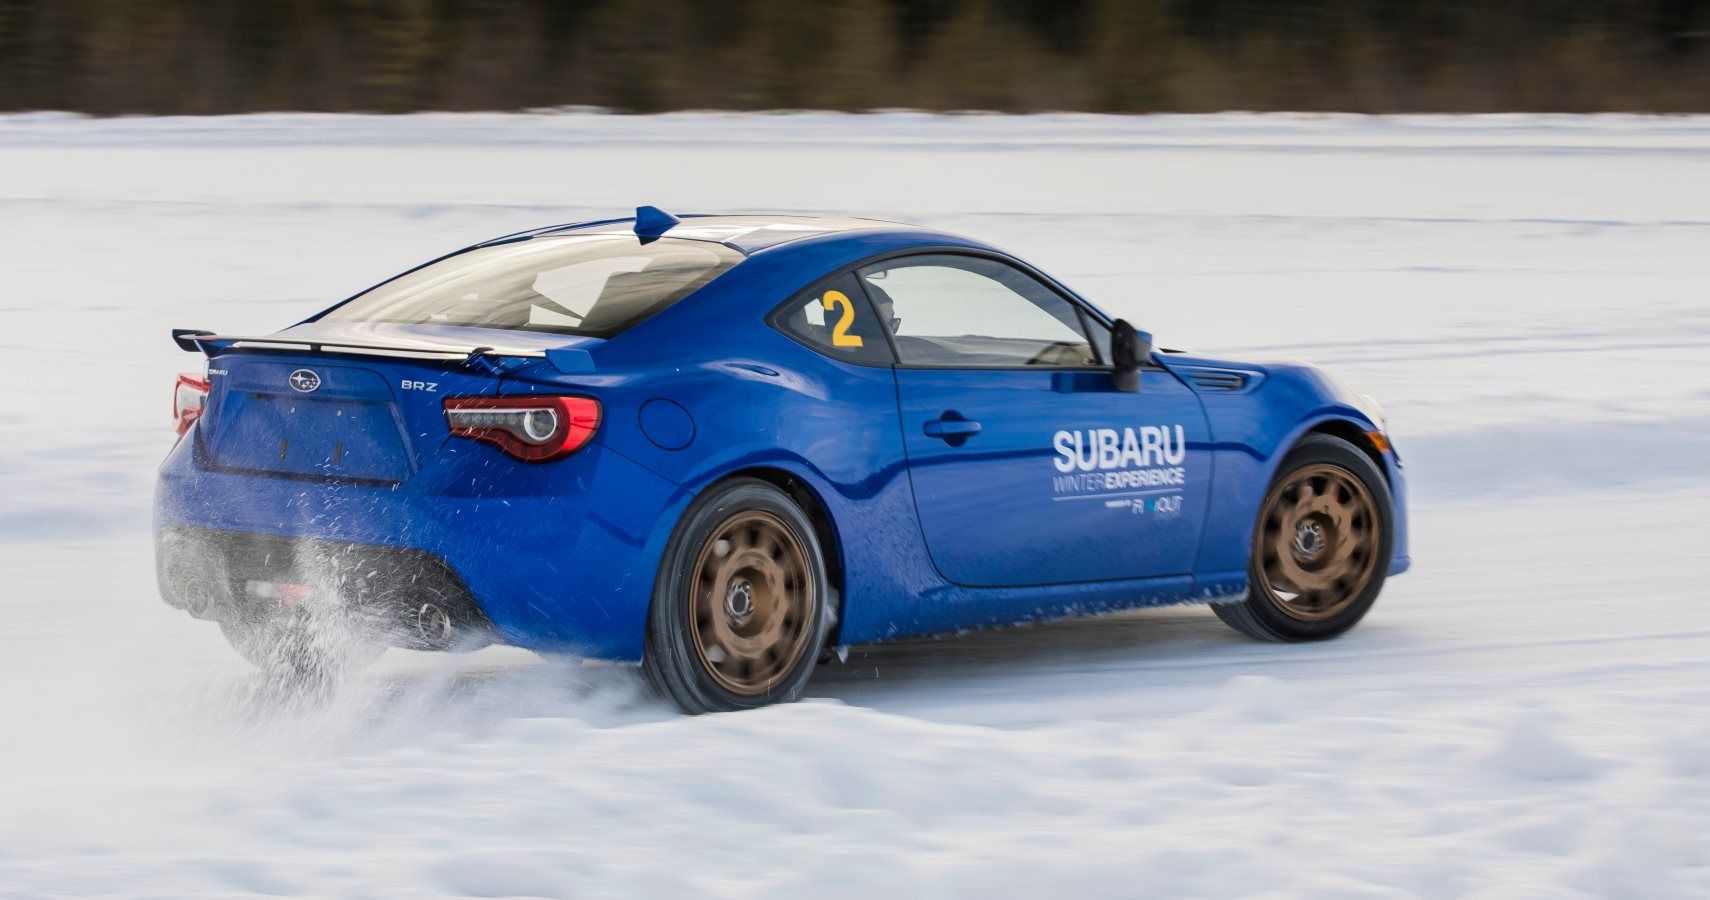 How The Subaru BRZ Is The Perfect Argument For Rear-Wheel Drive In Winter